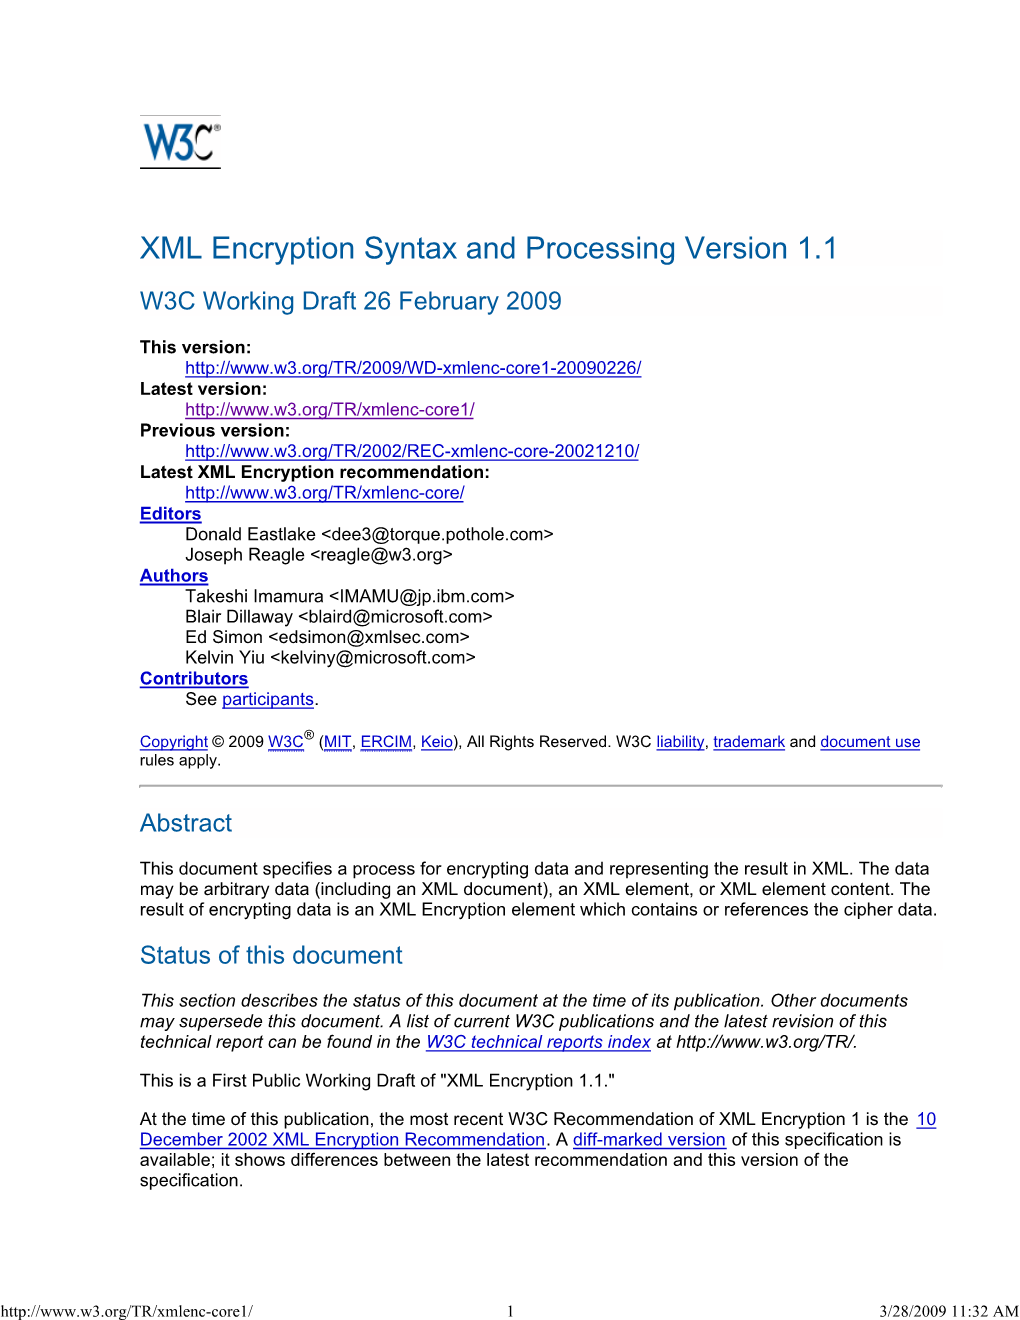 XML Encryption Syntax and Processing Version 1.1 W3C Working Draft 26 February 2009